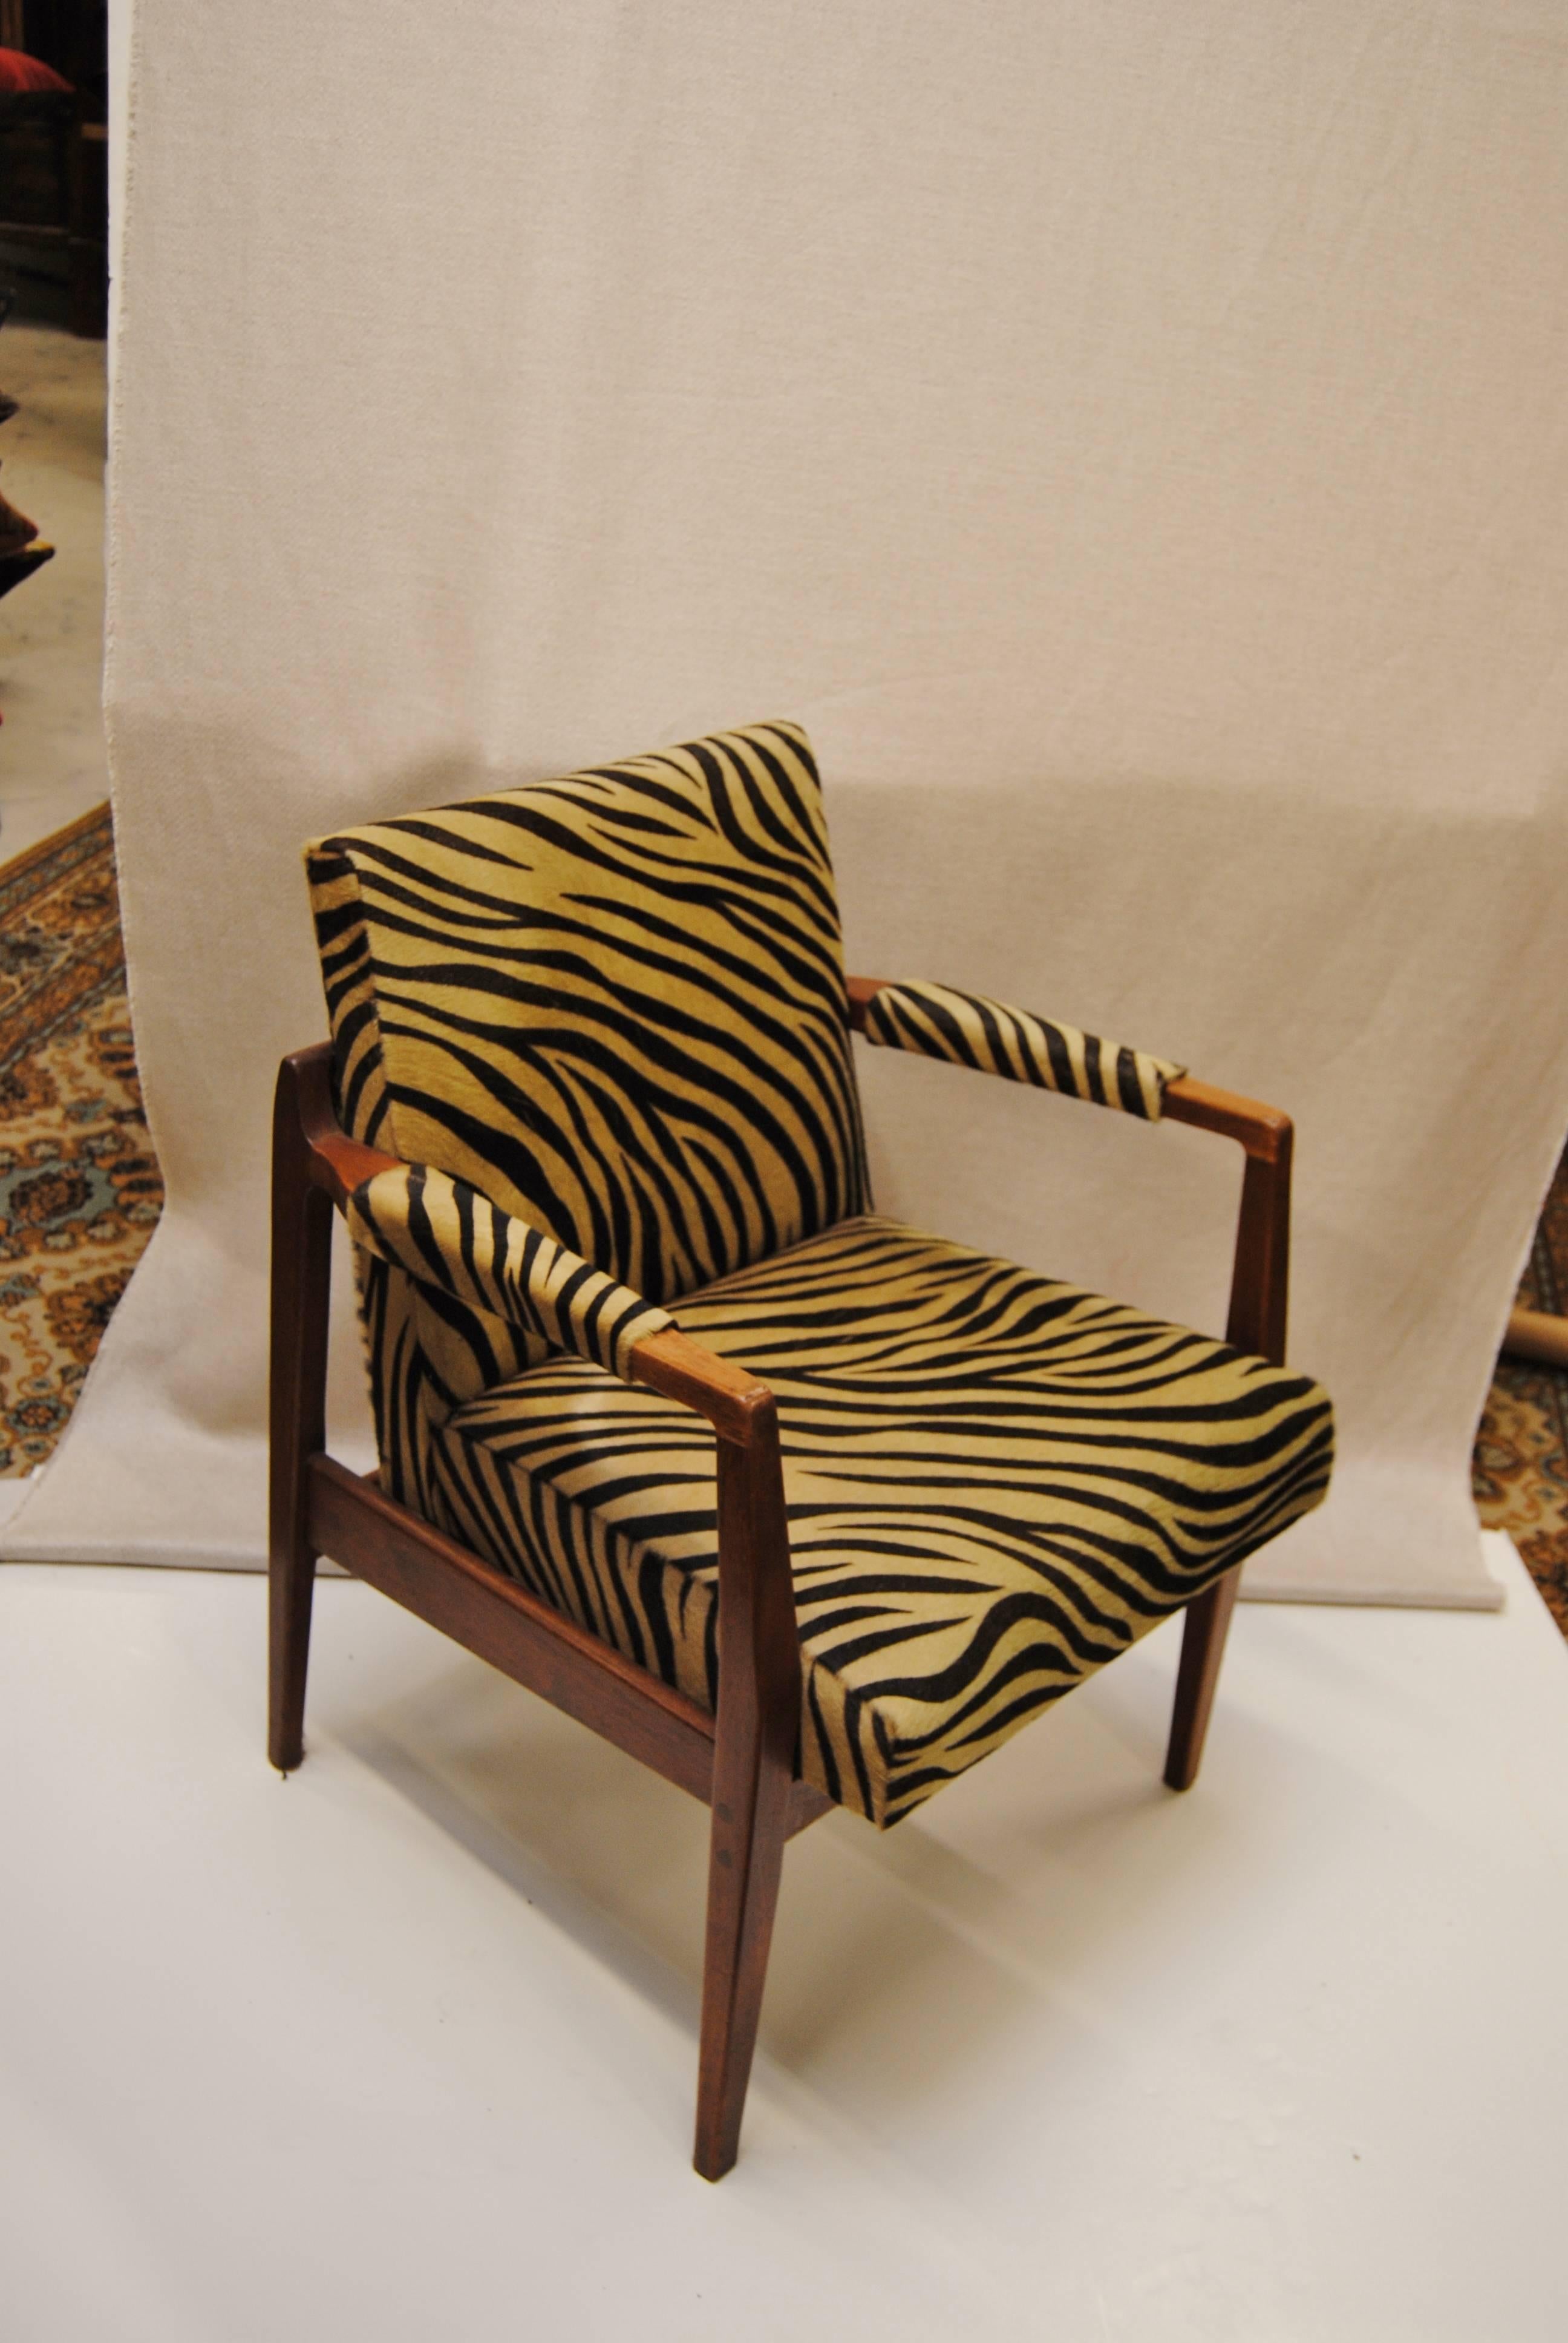 Vintage Danish modern walnut armchair, restored and upholstered in Edelman zebra cowhide. This is a heavy, comfortable chair with good design. Perfect accent chair for an eclectic style room.